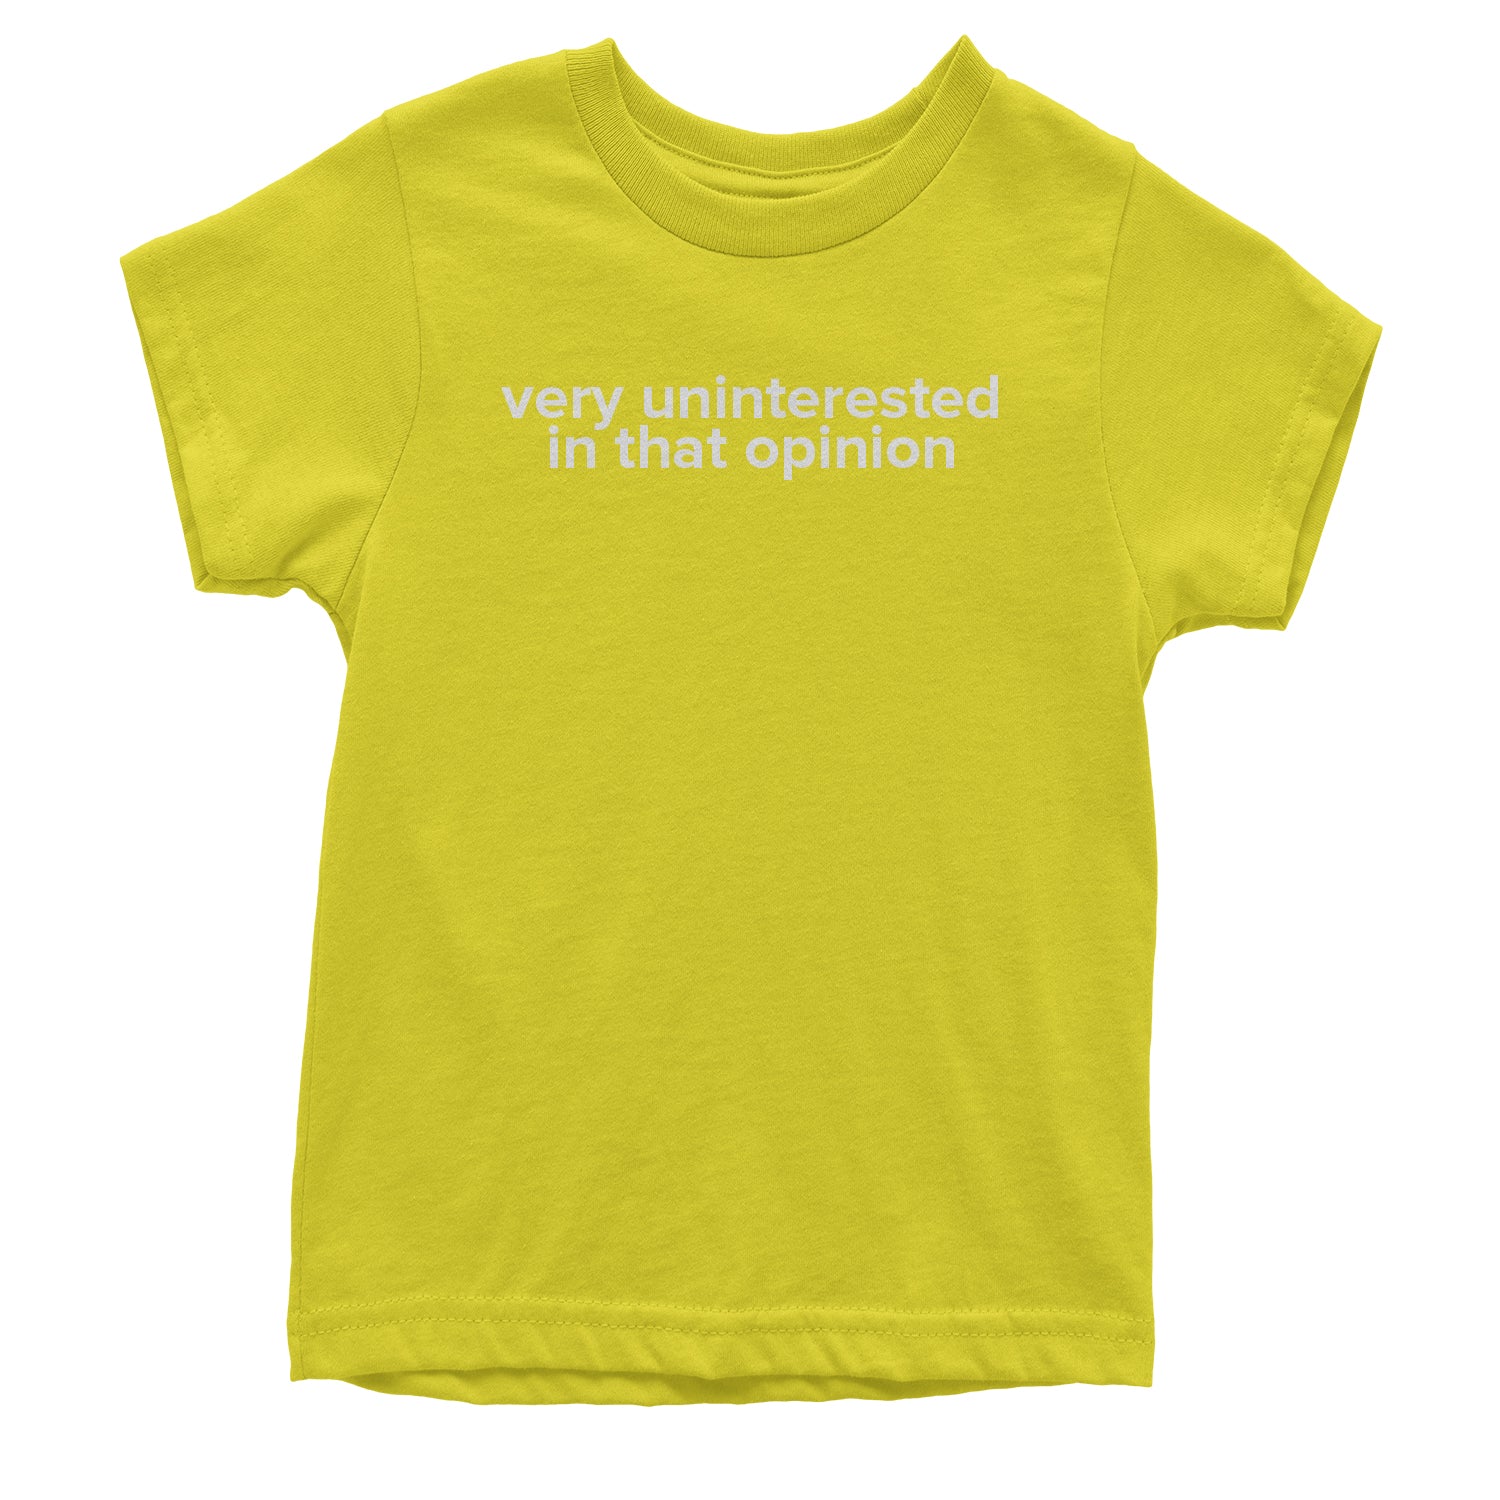 Very Uninterested In That Opinion Youth T-shirt alexis, creek, d, schitt, schitts by Expression Tees